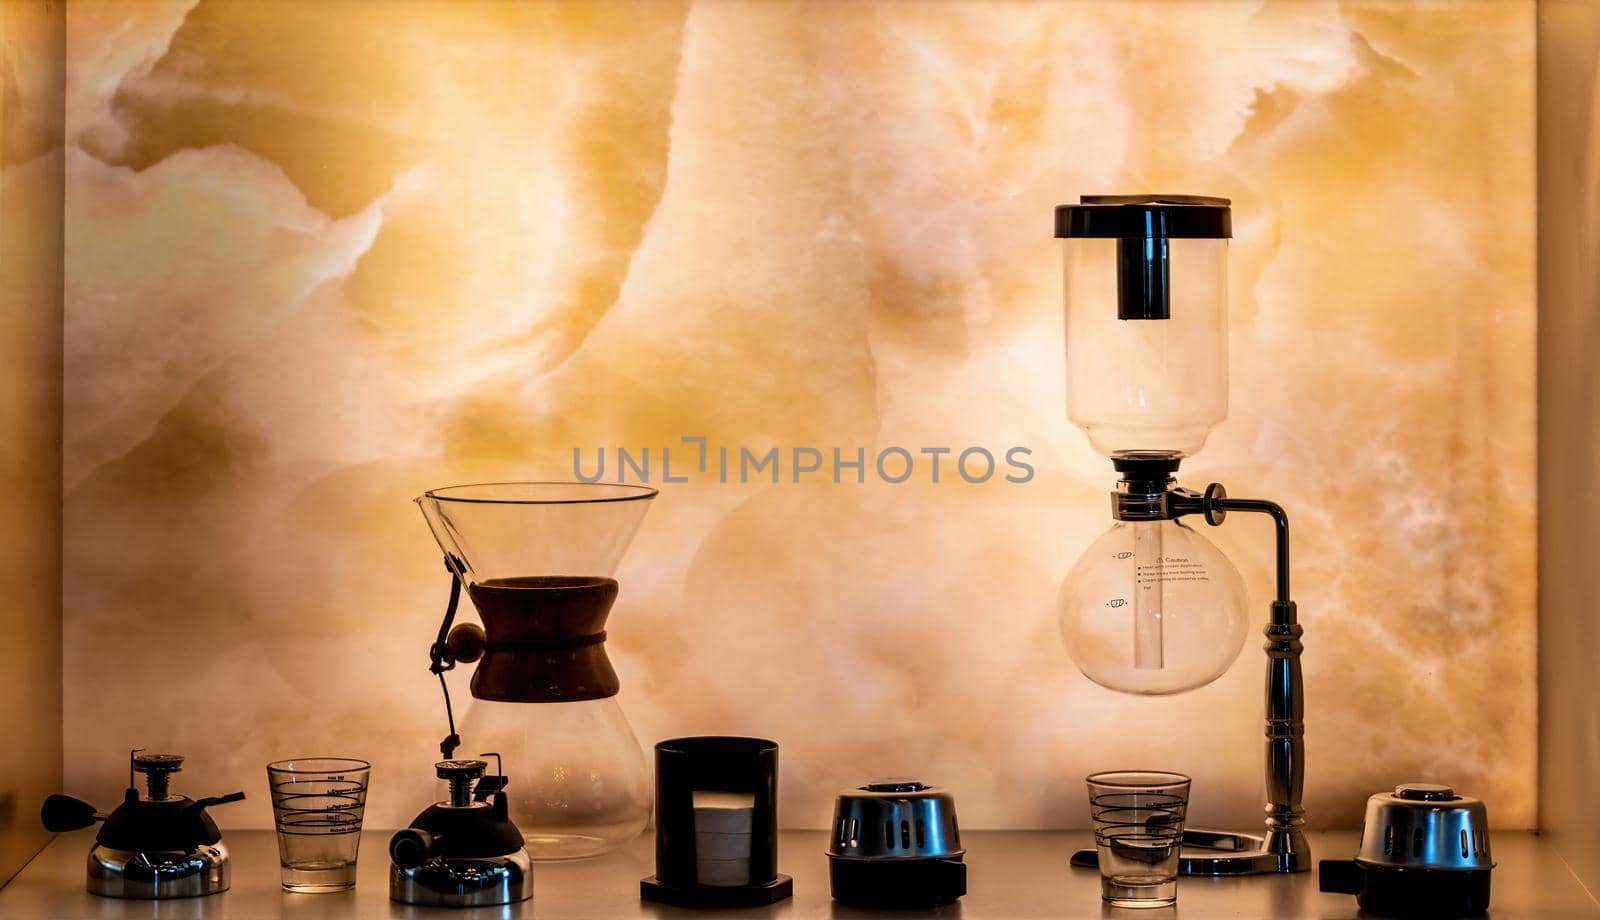 Alternative third generation coffee brewing equipments standing on the illuminated shelf. Selective focus by Sonat